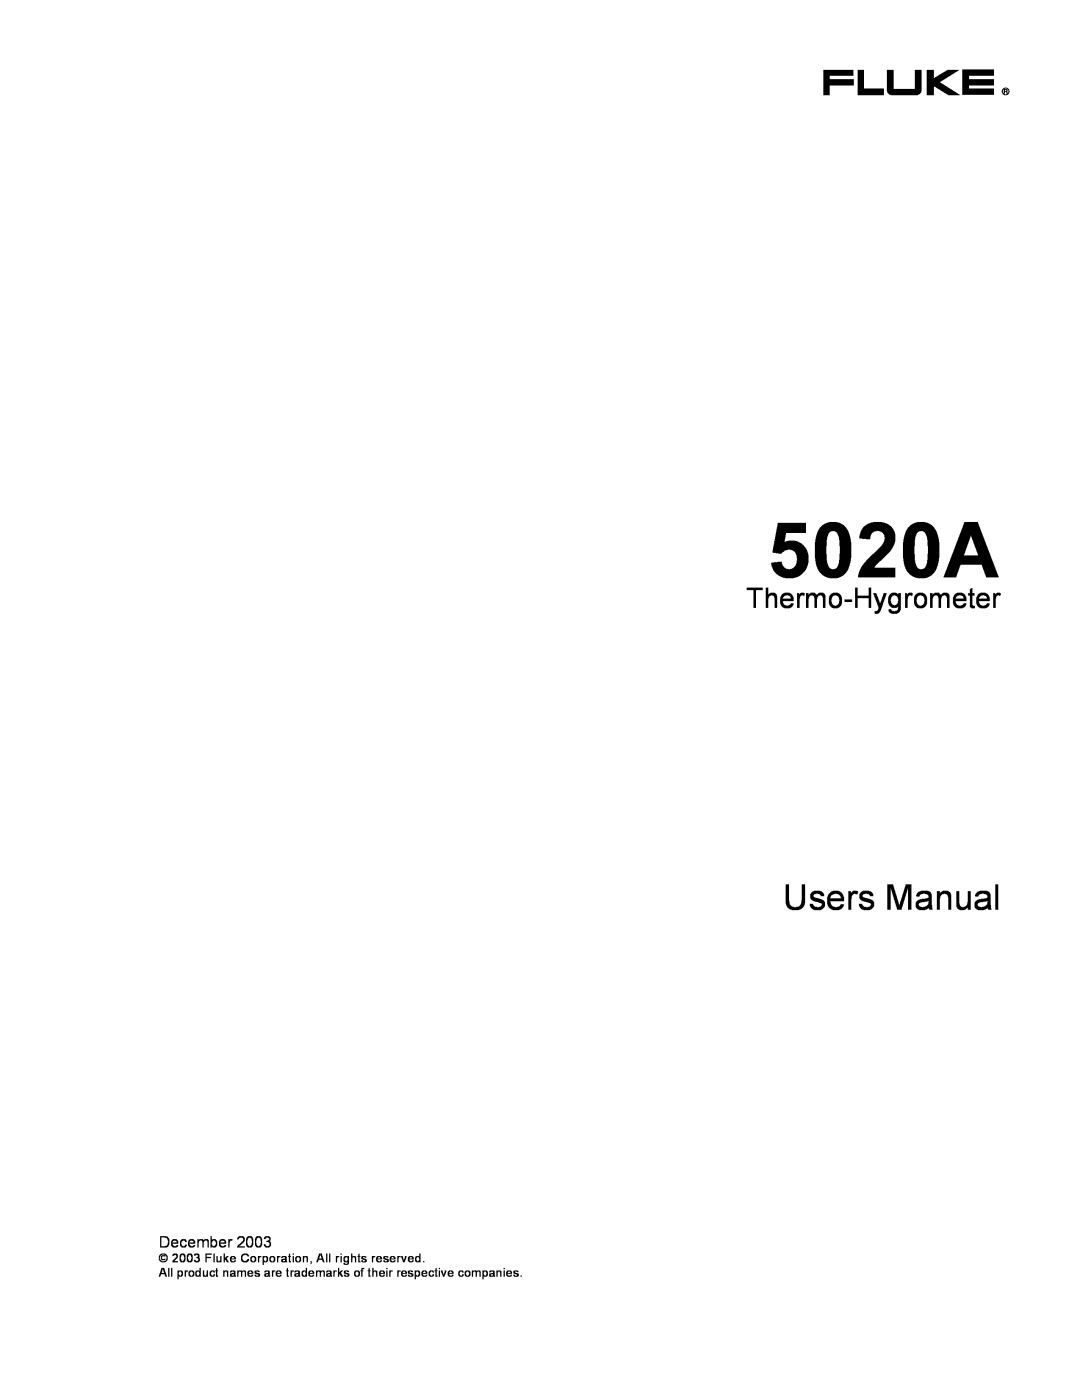 Fluke 5020A user manual Users Manual, Thermo-Hygrometer, Fluke Corporation, All rights reserved 